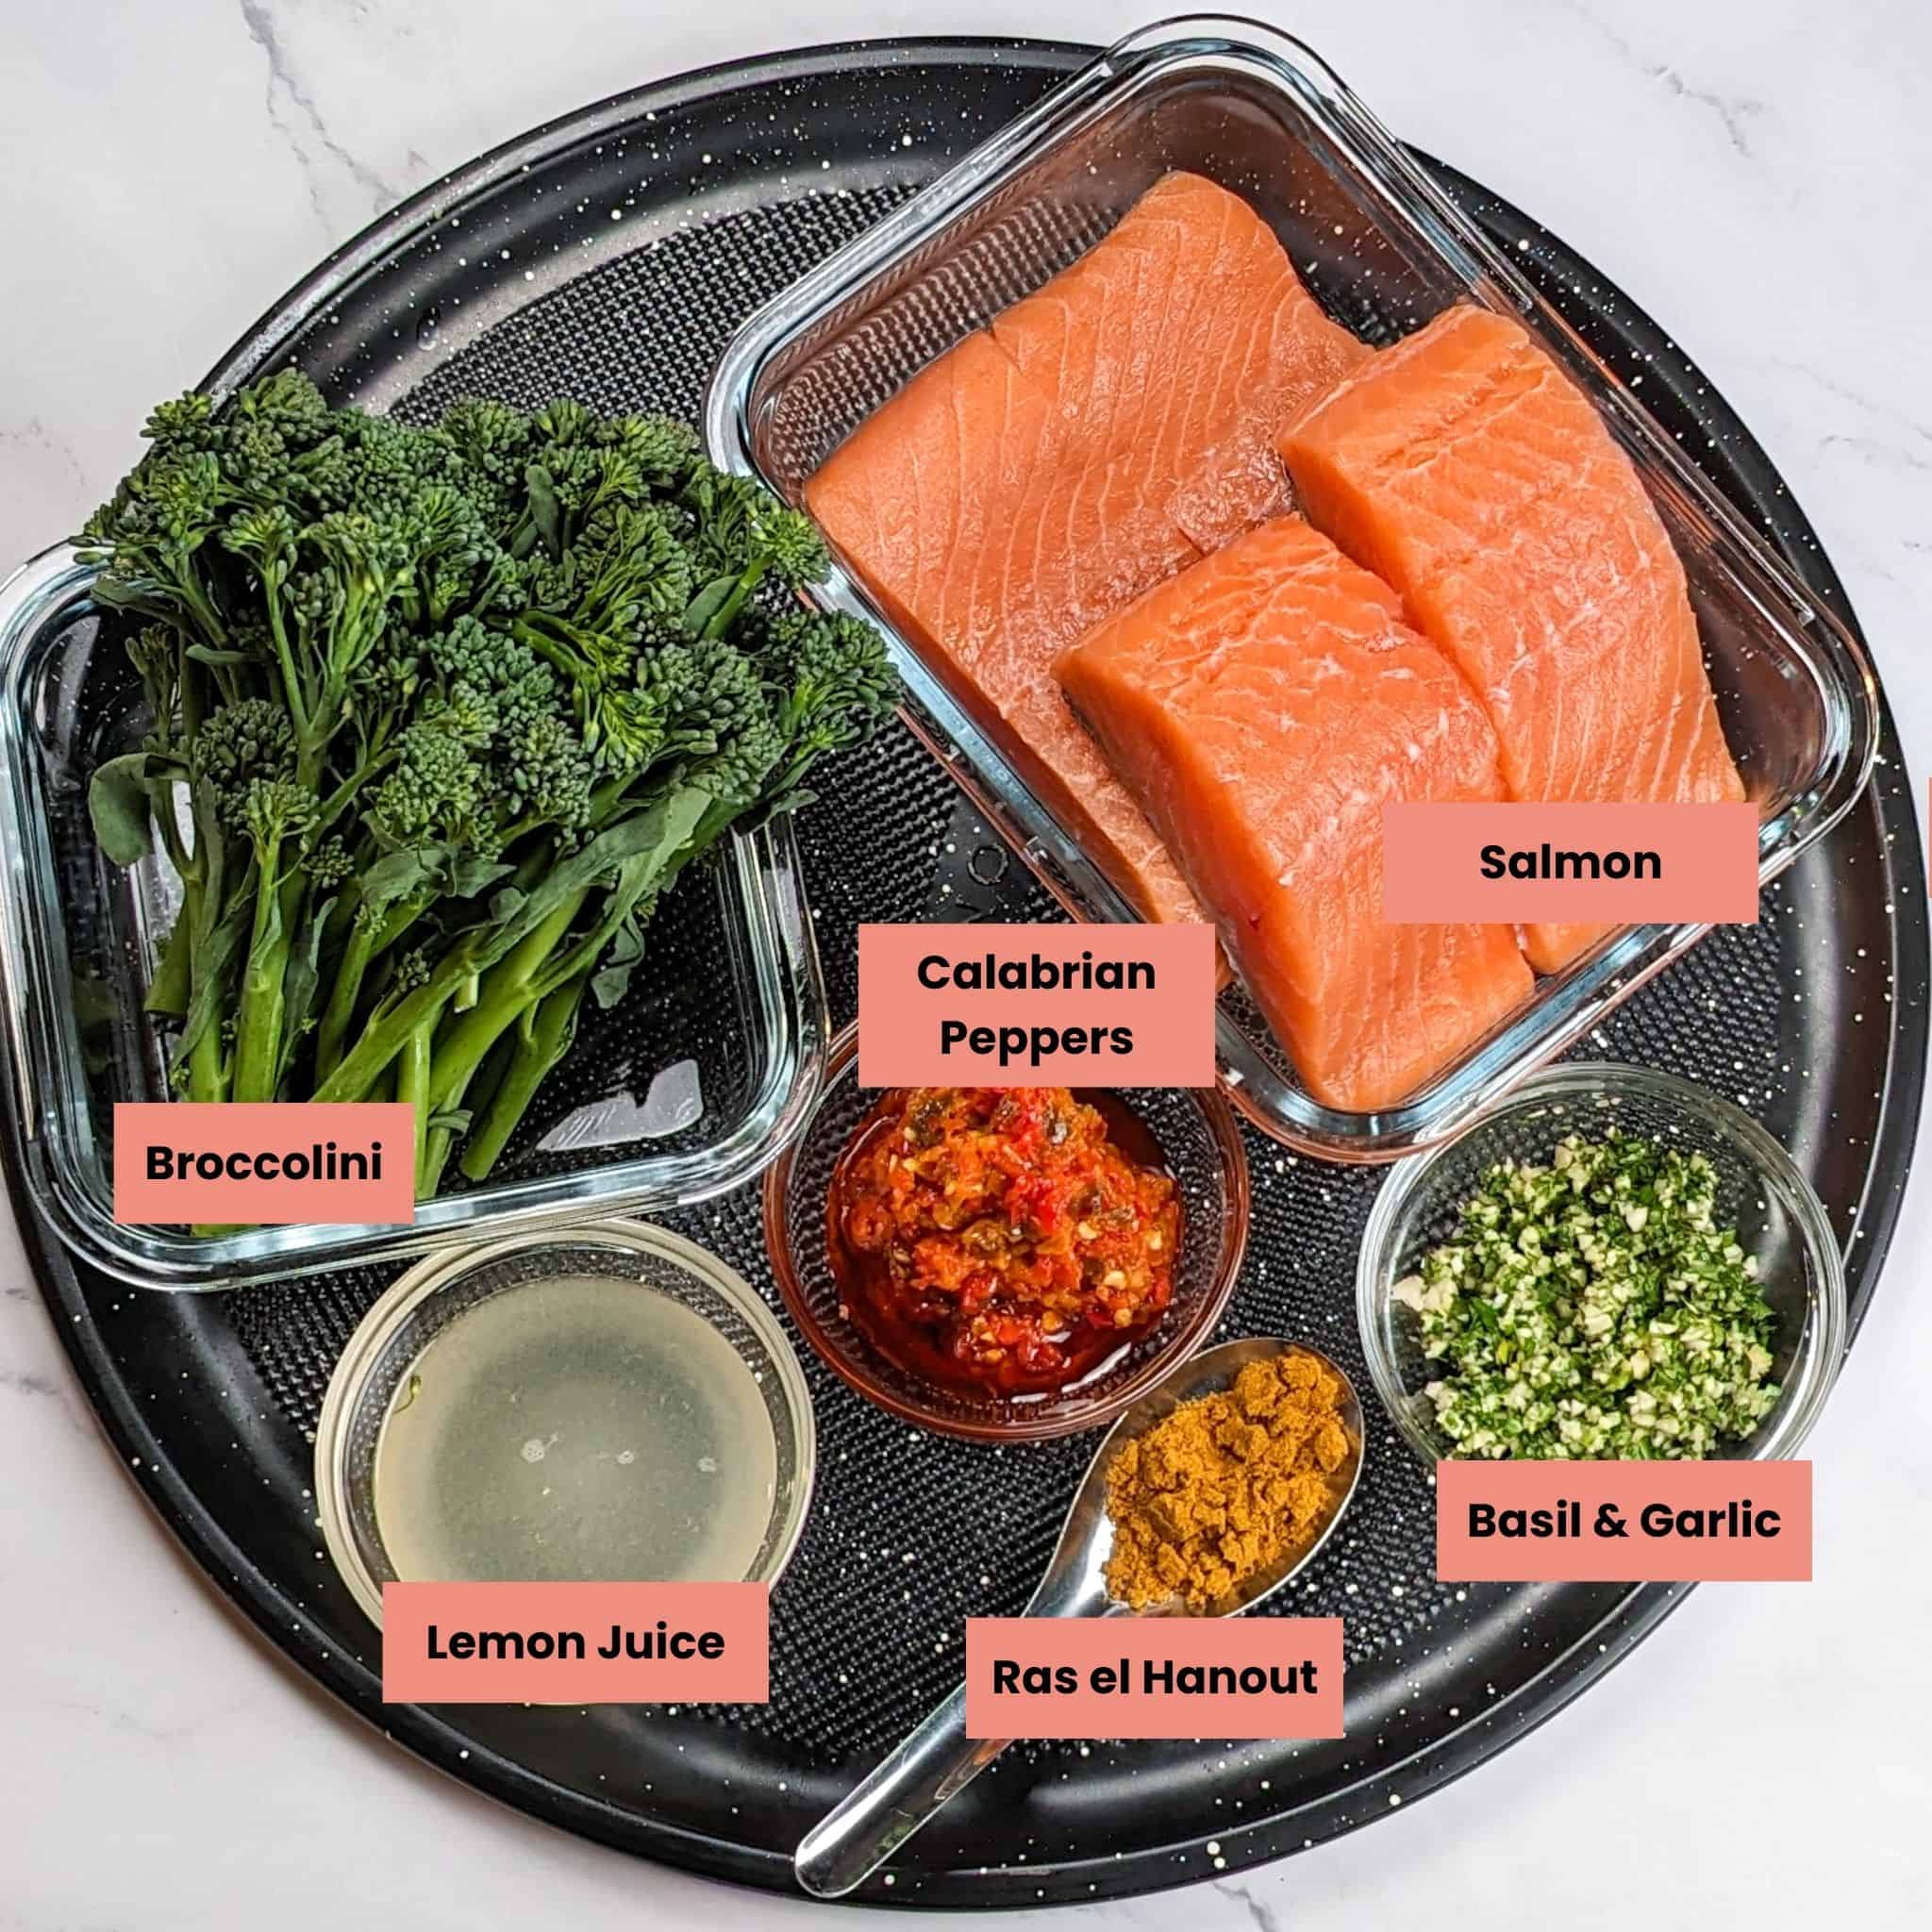 ingredients for the Calabrian Pepper Basil Baked Salmon and Broccolini in containers on a large round pizza pan.